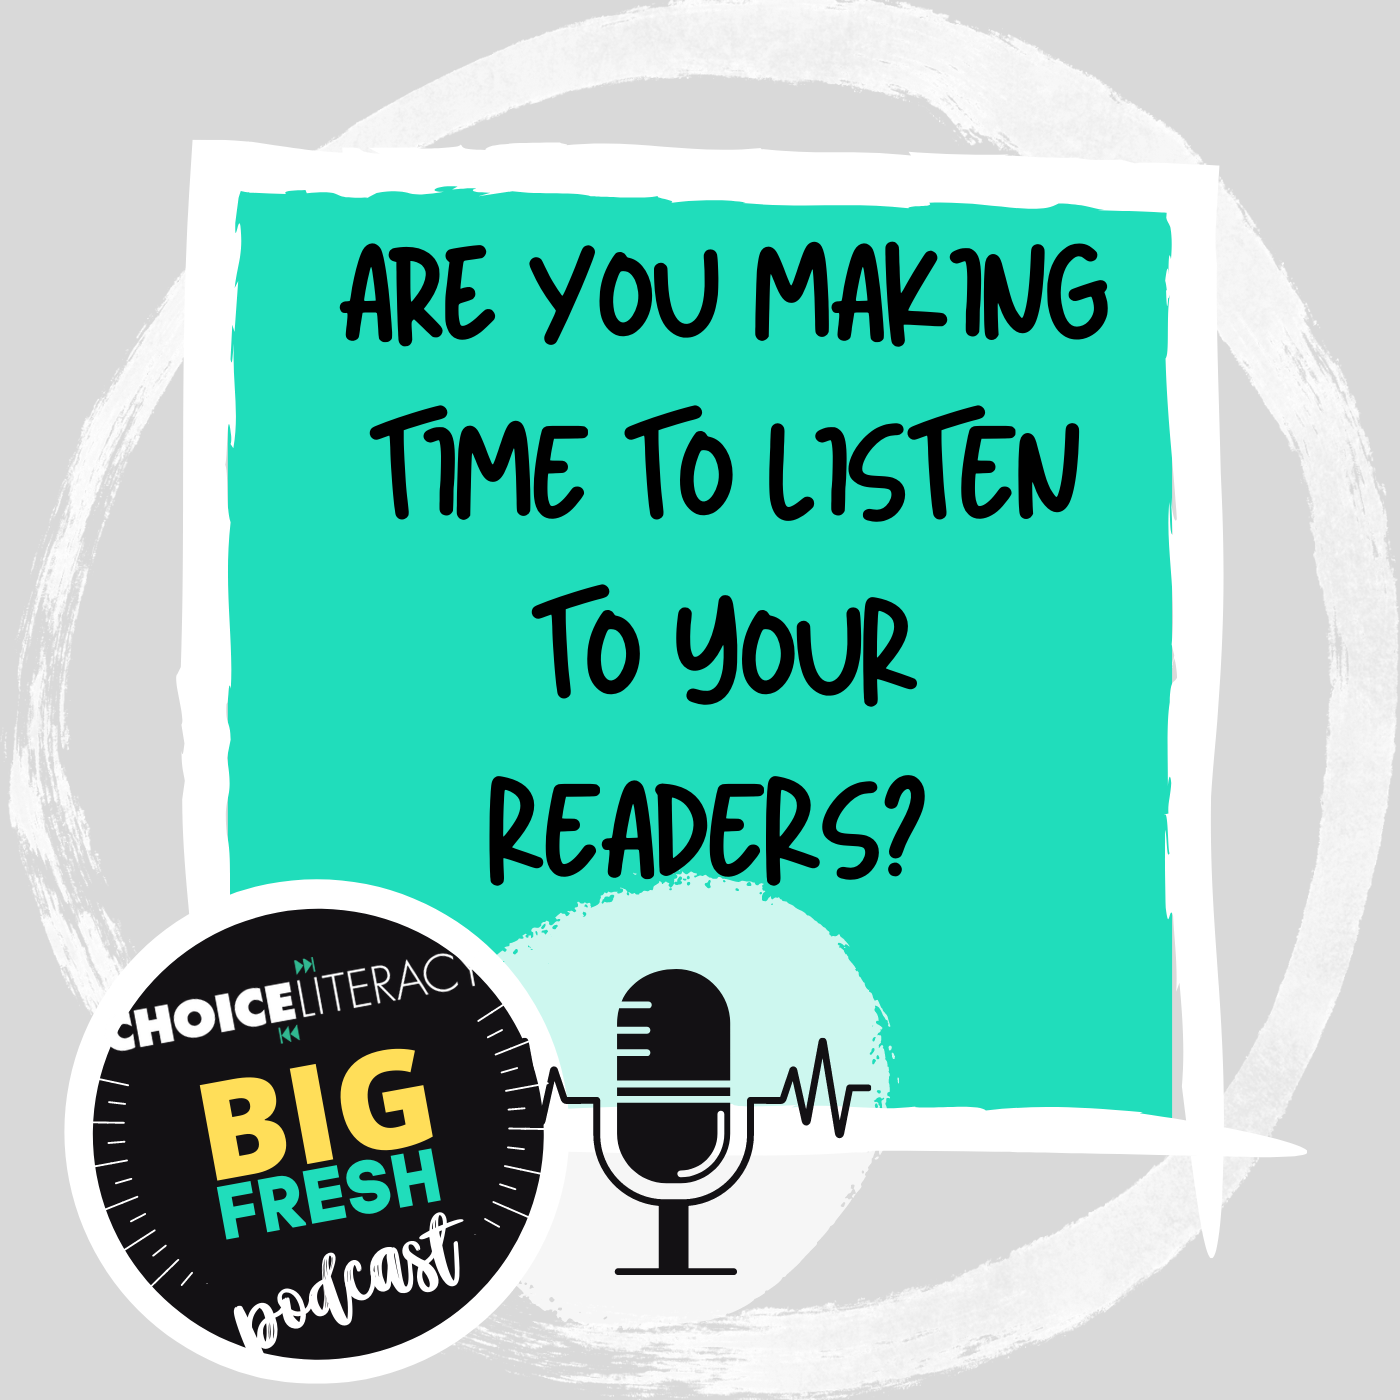 Are you listening to readers?